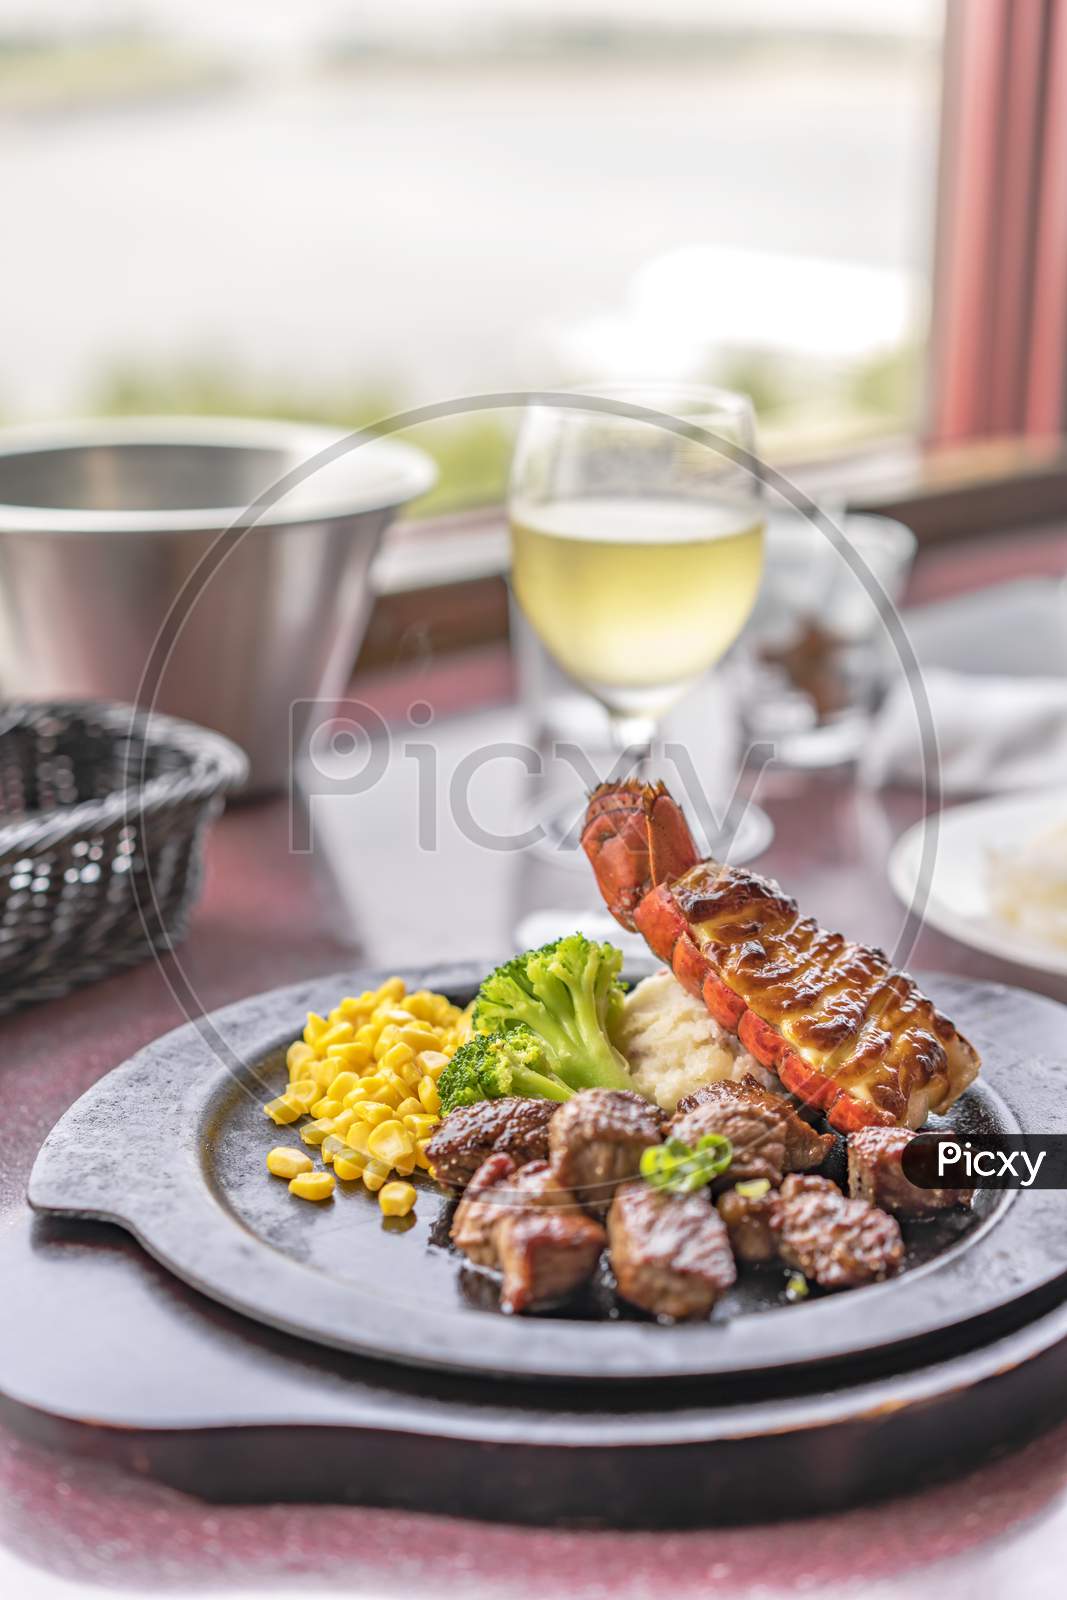 Beef Steack And Seafood Lobster Tail With Cheese, Corn And Broccoli On Plate With White Wine In Glass.